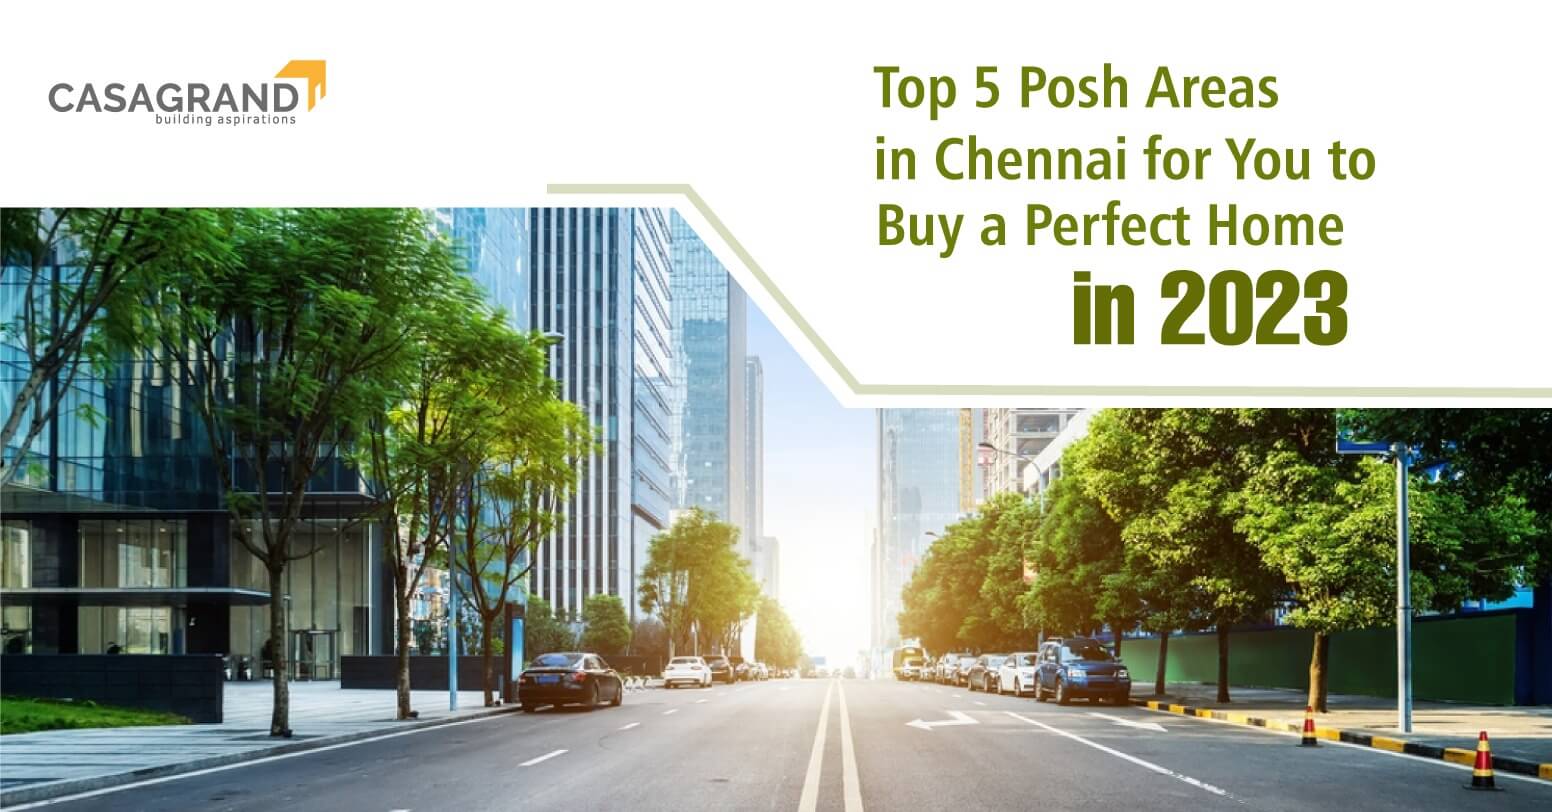 Top 5 Posh Areas in Chennai for You to Buy a Perfect Home in 2023